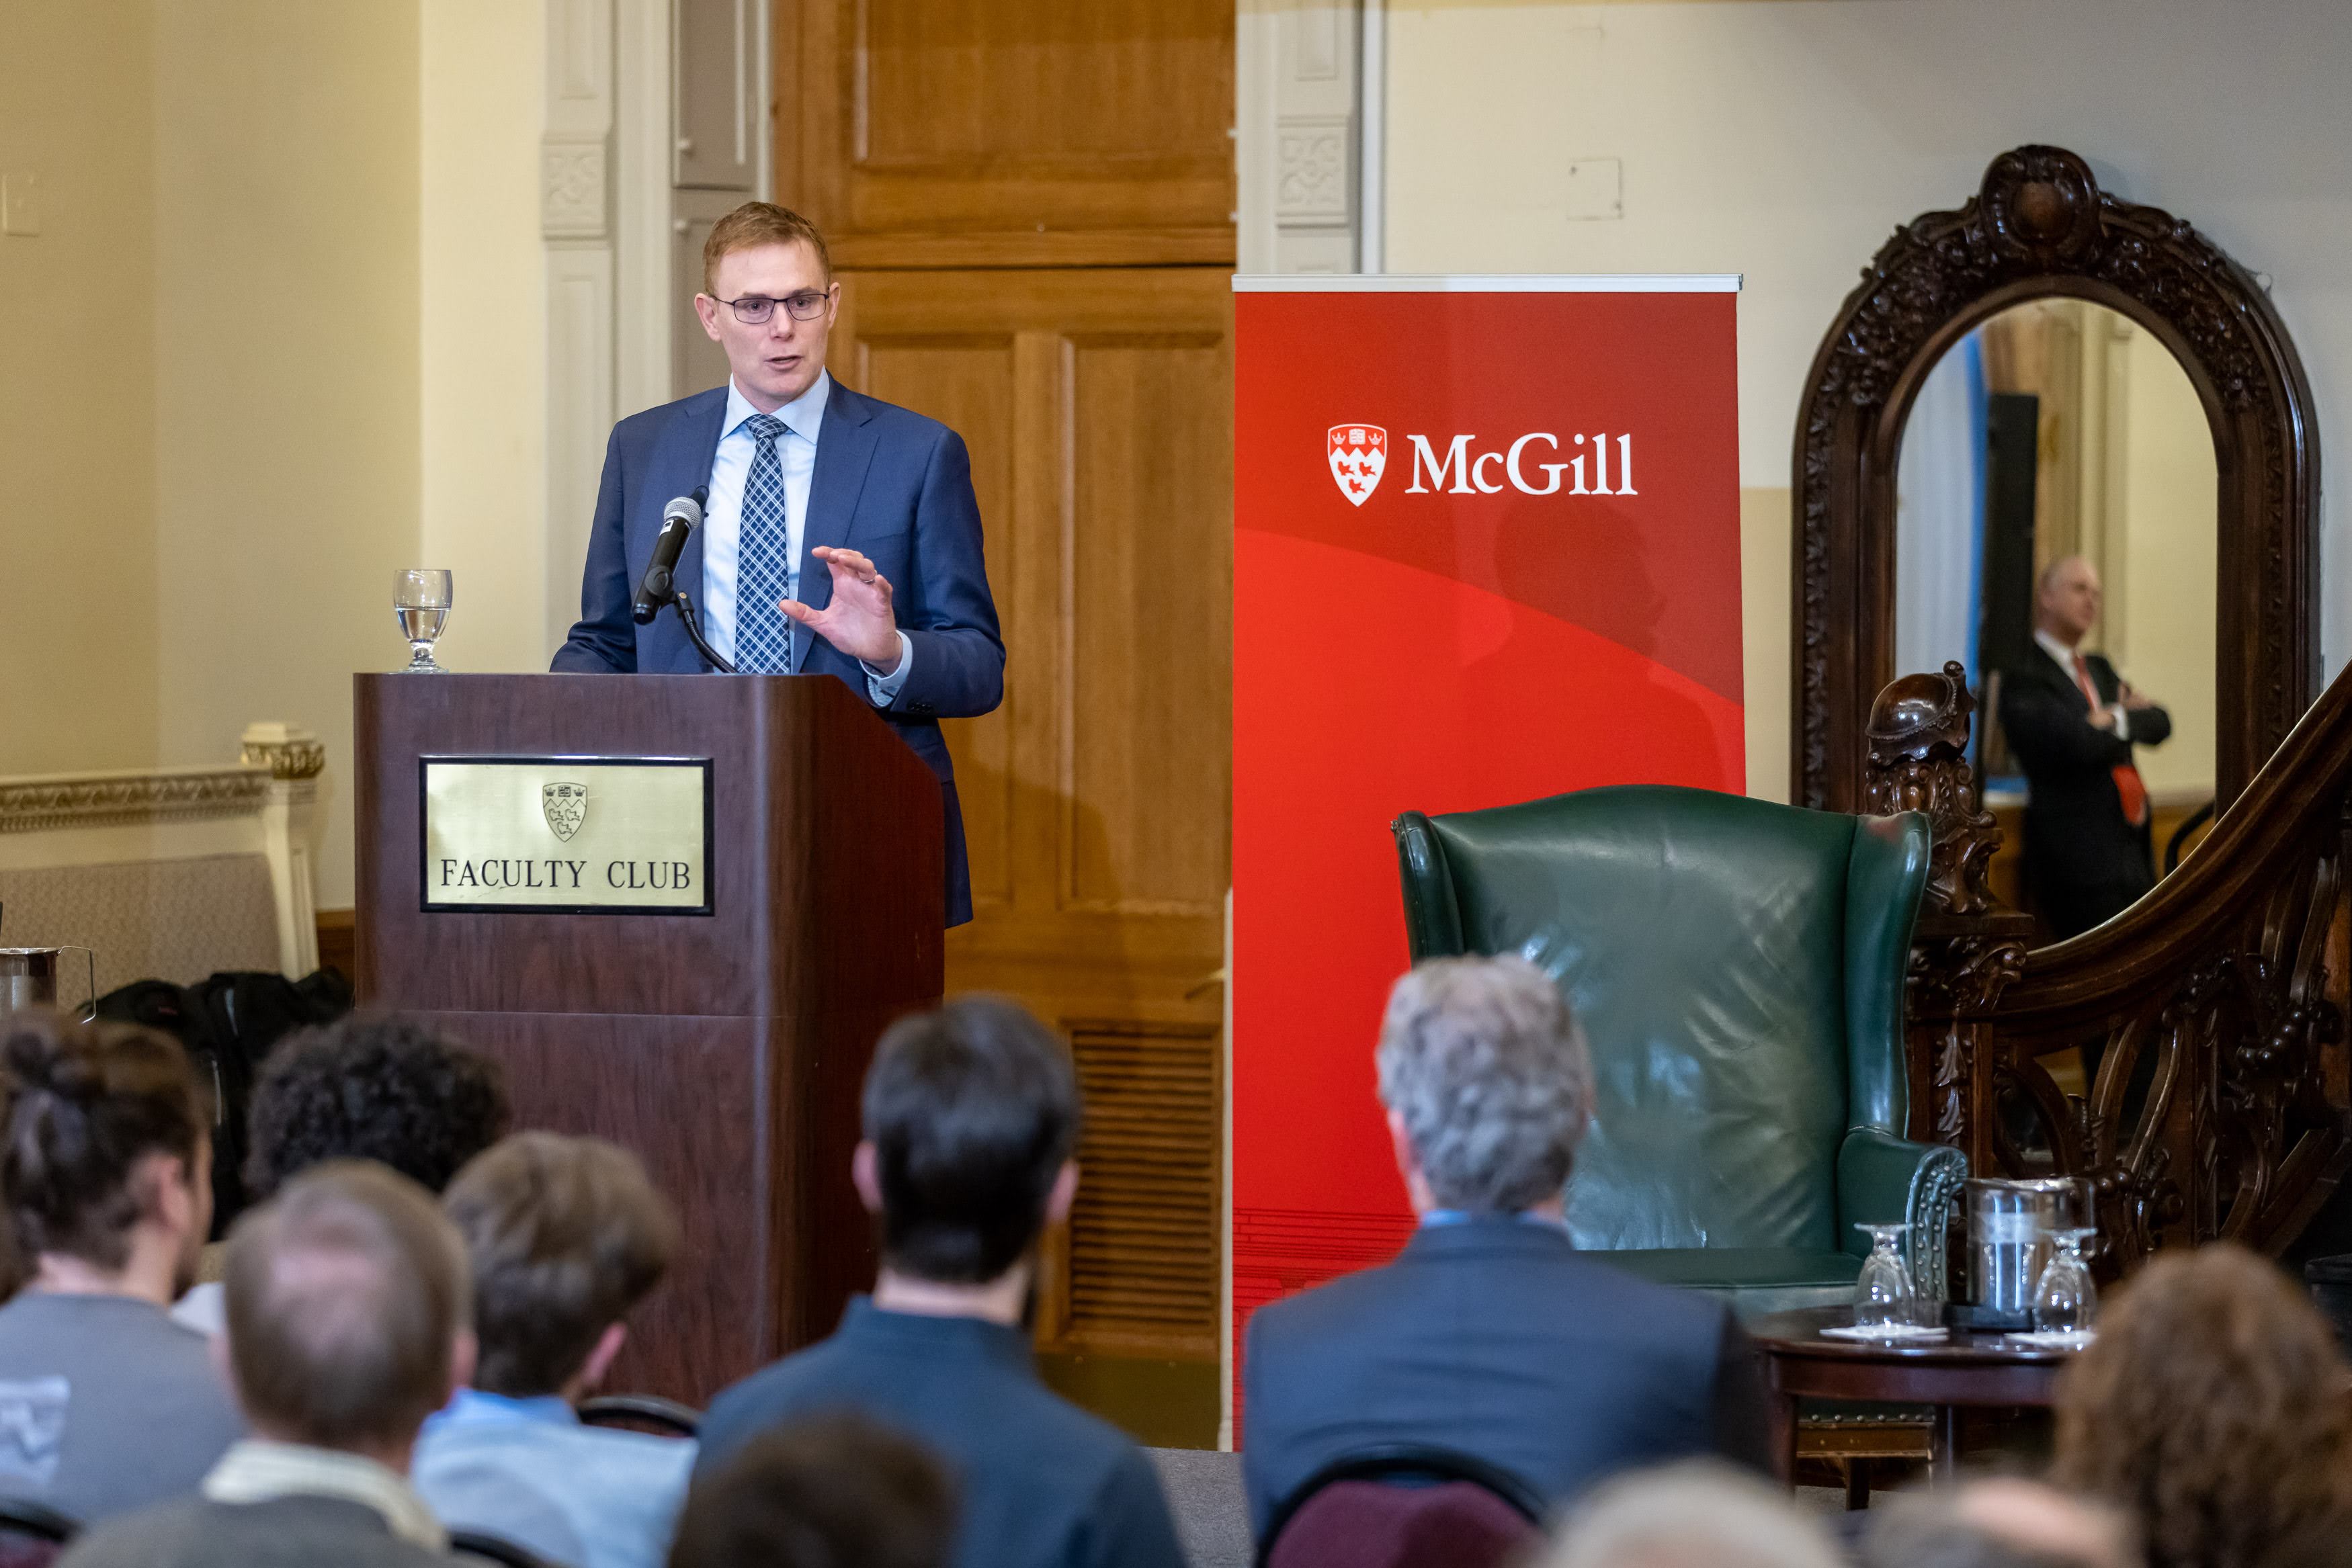 Andrew Leach giving a lecture on stage at the McGill Faculty Club in Montréal.